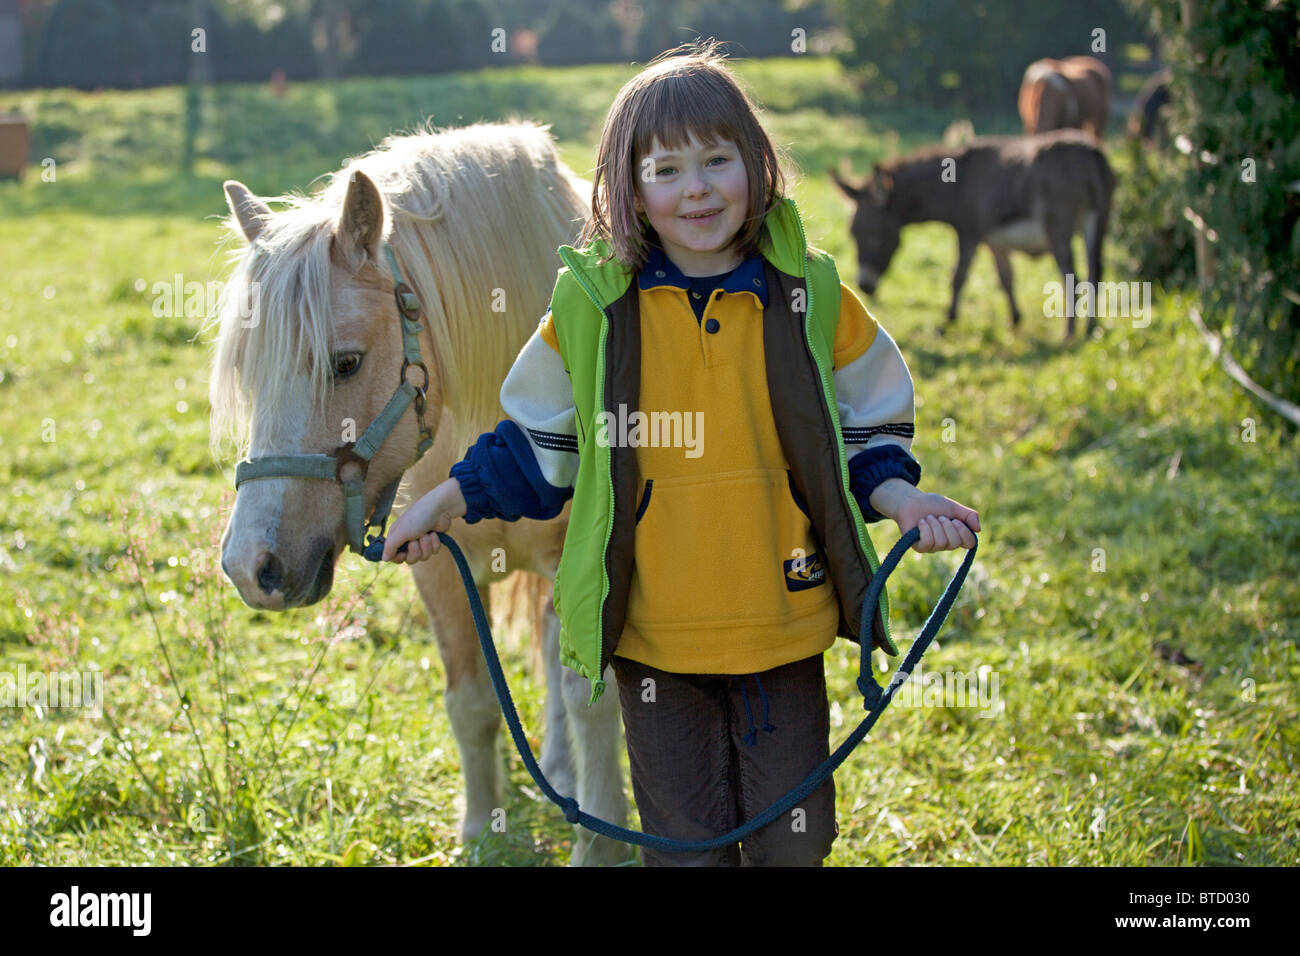 portrait of a little girl walking with a pony Stock Photo